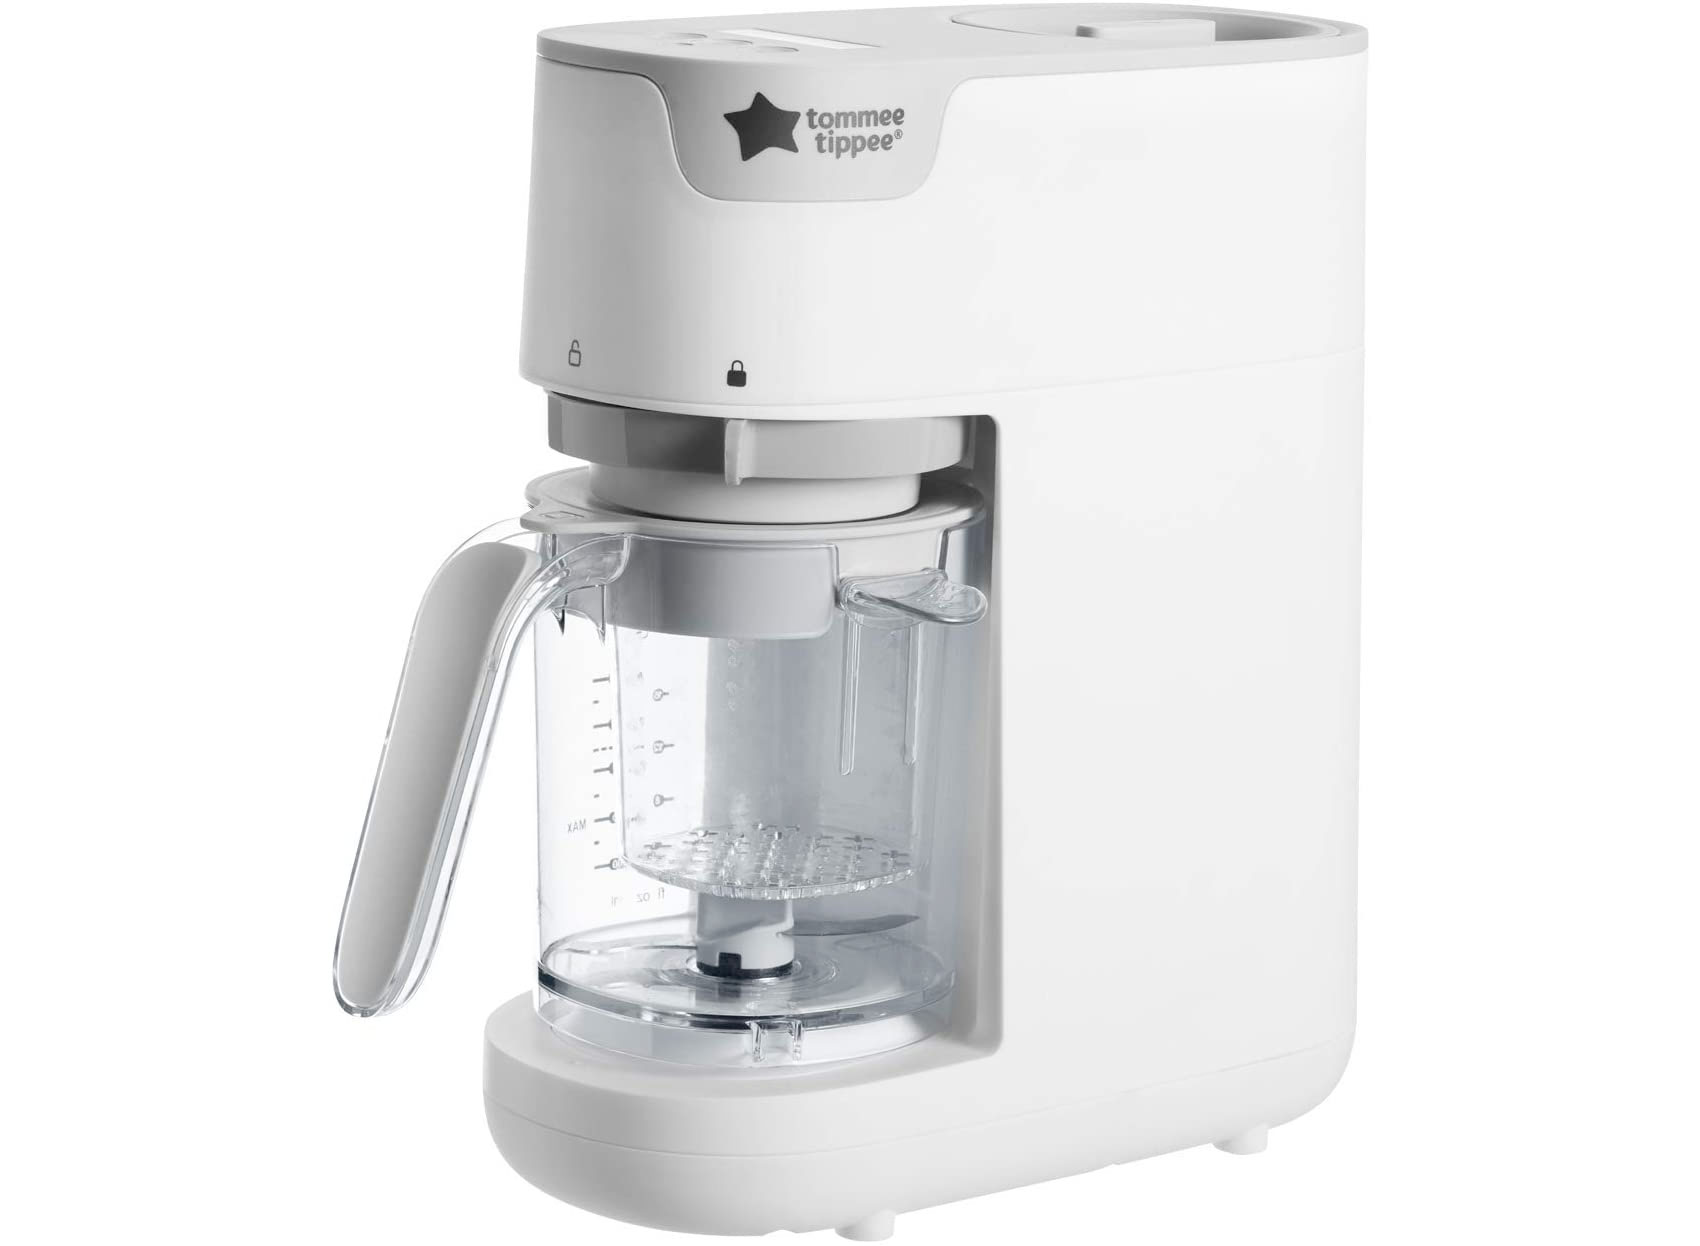 Amazon：Tommee Tippee Quick Cook Baby Food Maker只賣$49.98